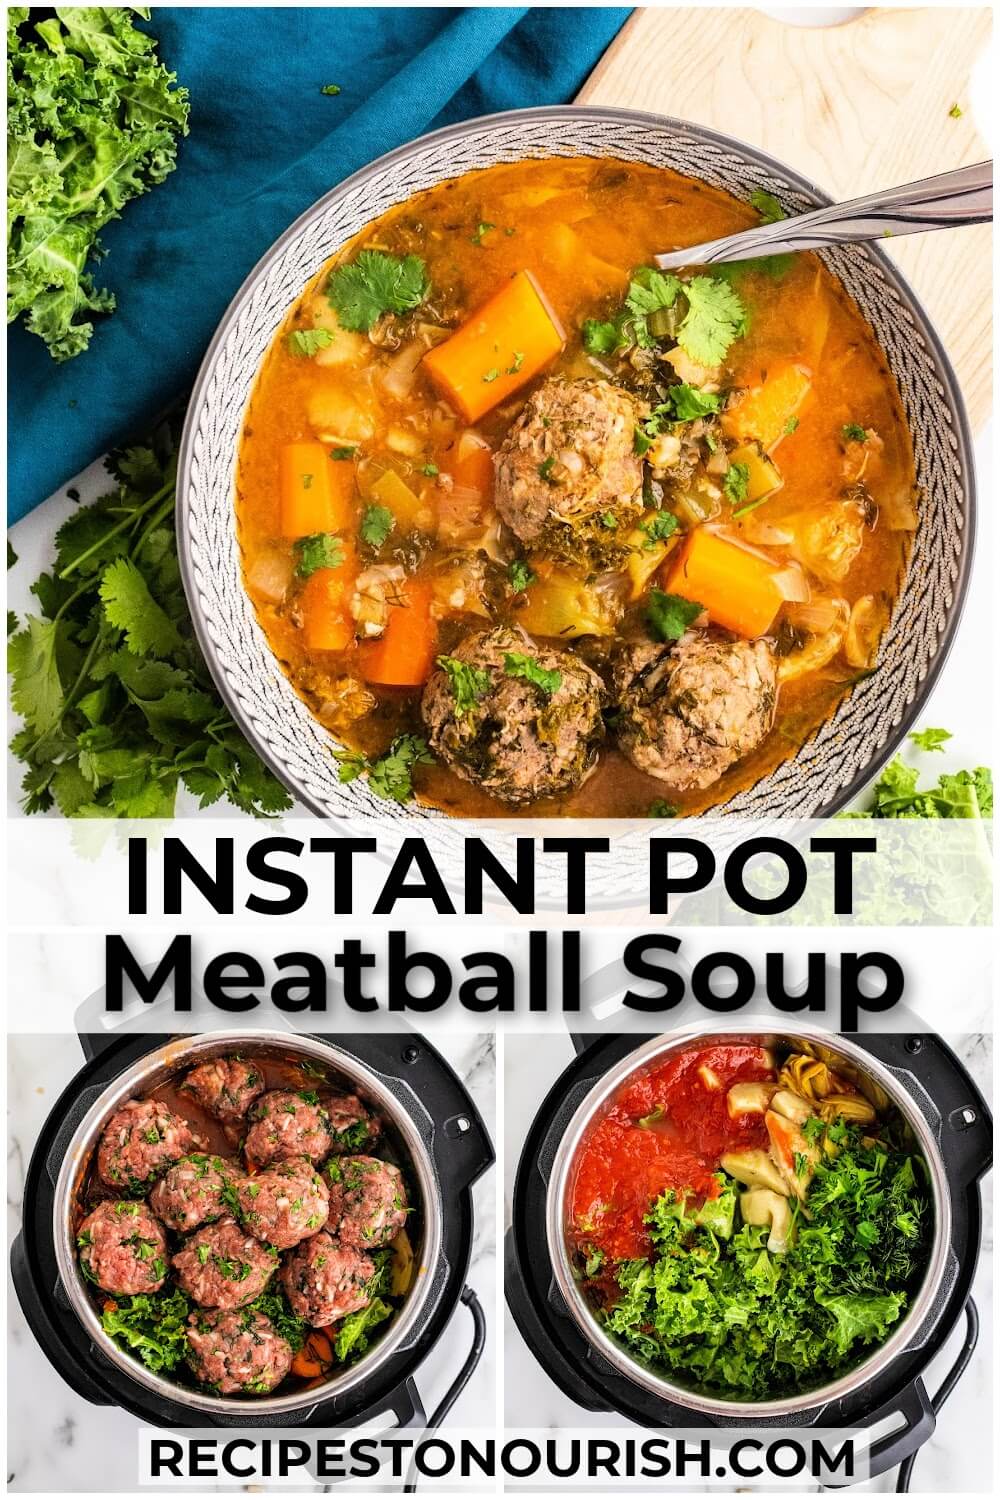 Overhead shot of a bowl of meatball soup with carrots and fresh herbs sitting next to fresh herbs, fresh kale and a blue cloth napkin, one photo of an Instant Pot full of meatballs, one photo of an Instant Pot filled with crushed tomatoes, kale, artichoke hearts and vegetables with text that says Instant Pot Meatball Soup RECIPESTONOURISH.com